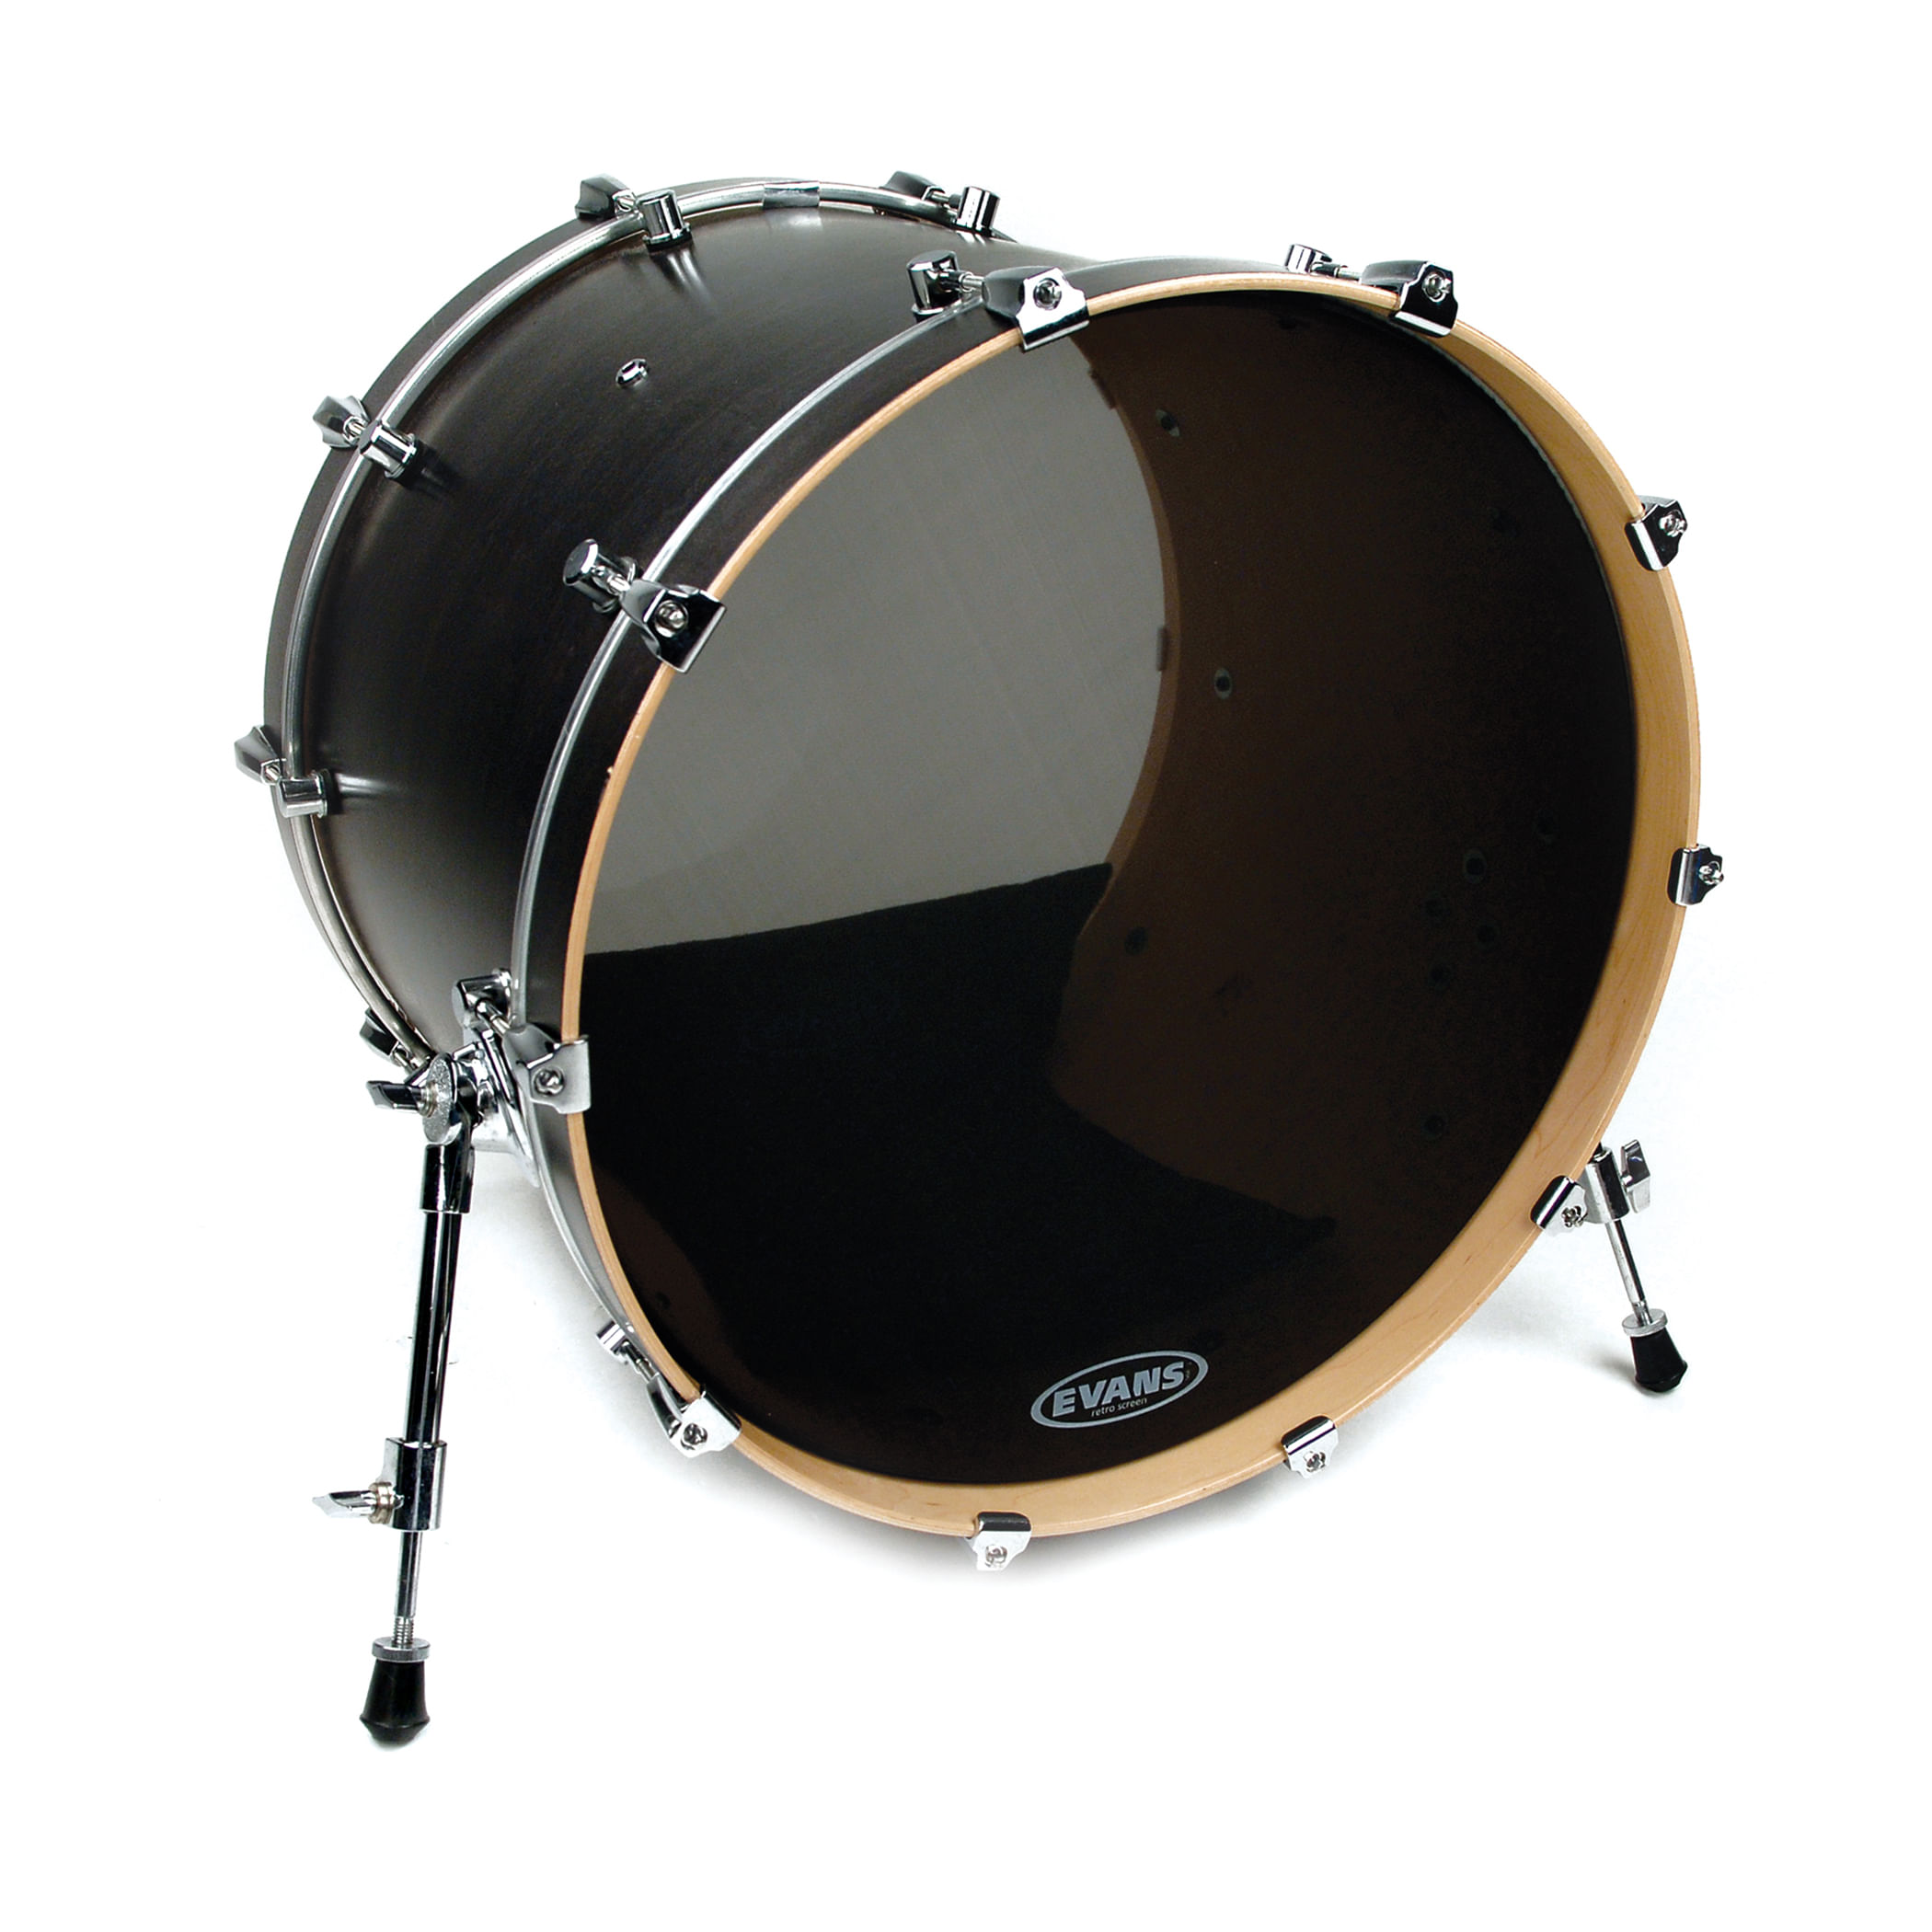 Bass Drum 22 Inch Mesh Head With Built-In Trigger